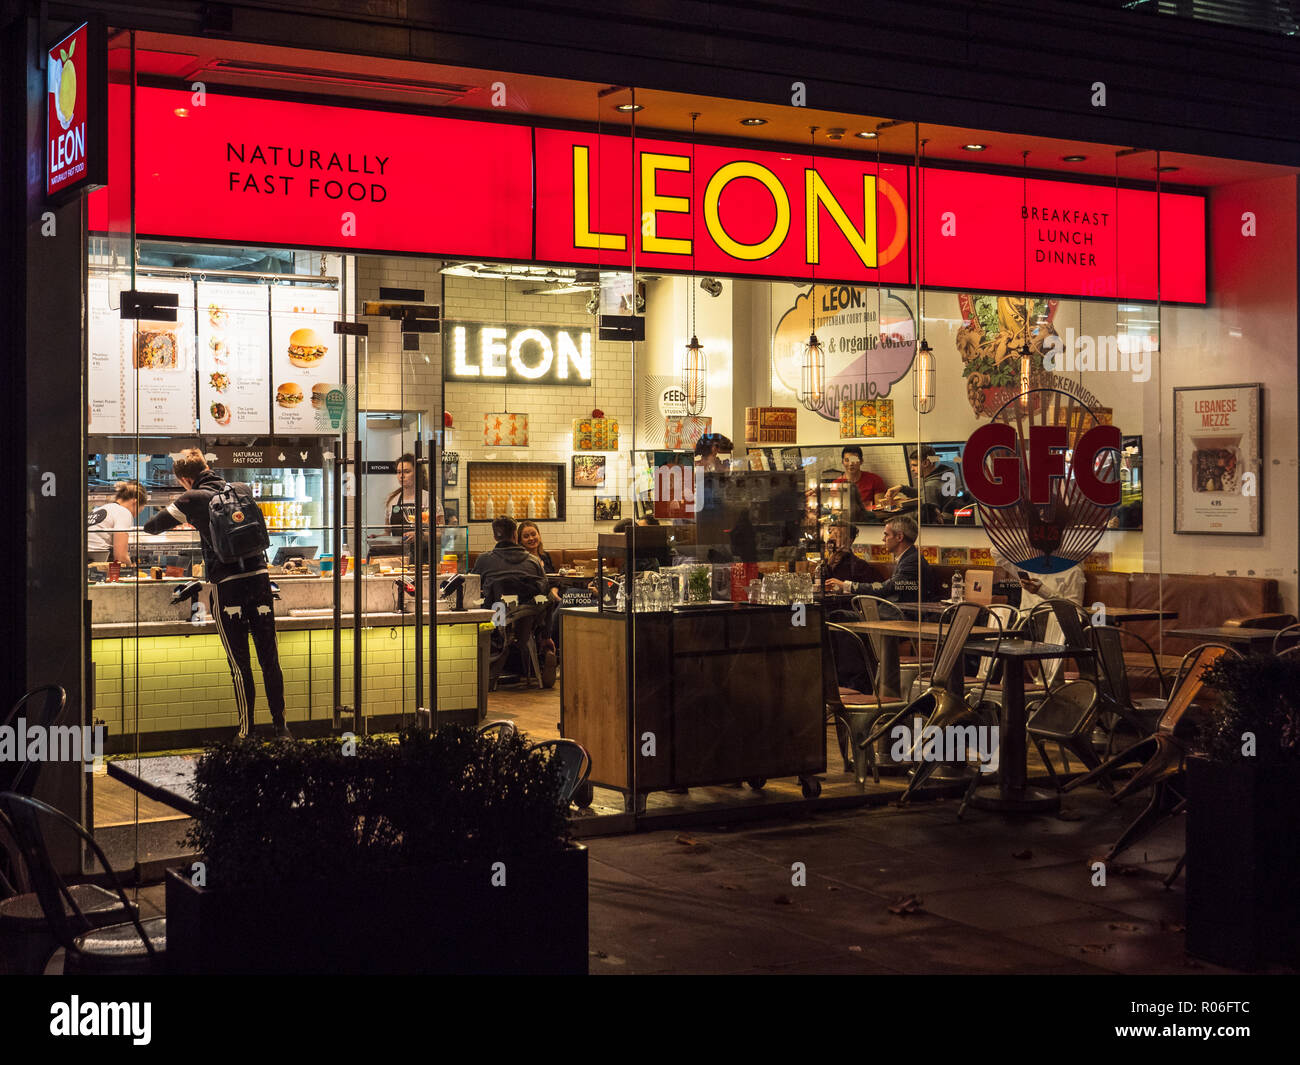 Leon Restaurant at Night. The Leon healthy & wholesome fast food restaurant in London's Tottenham Court Road Stock Photo